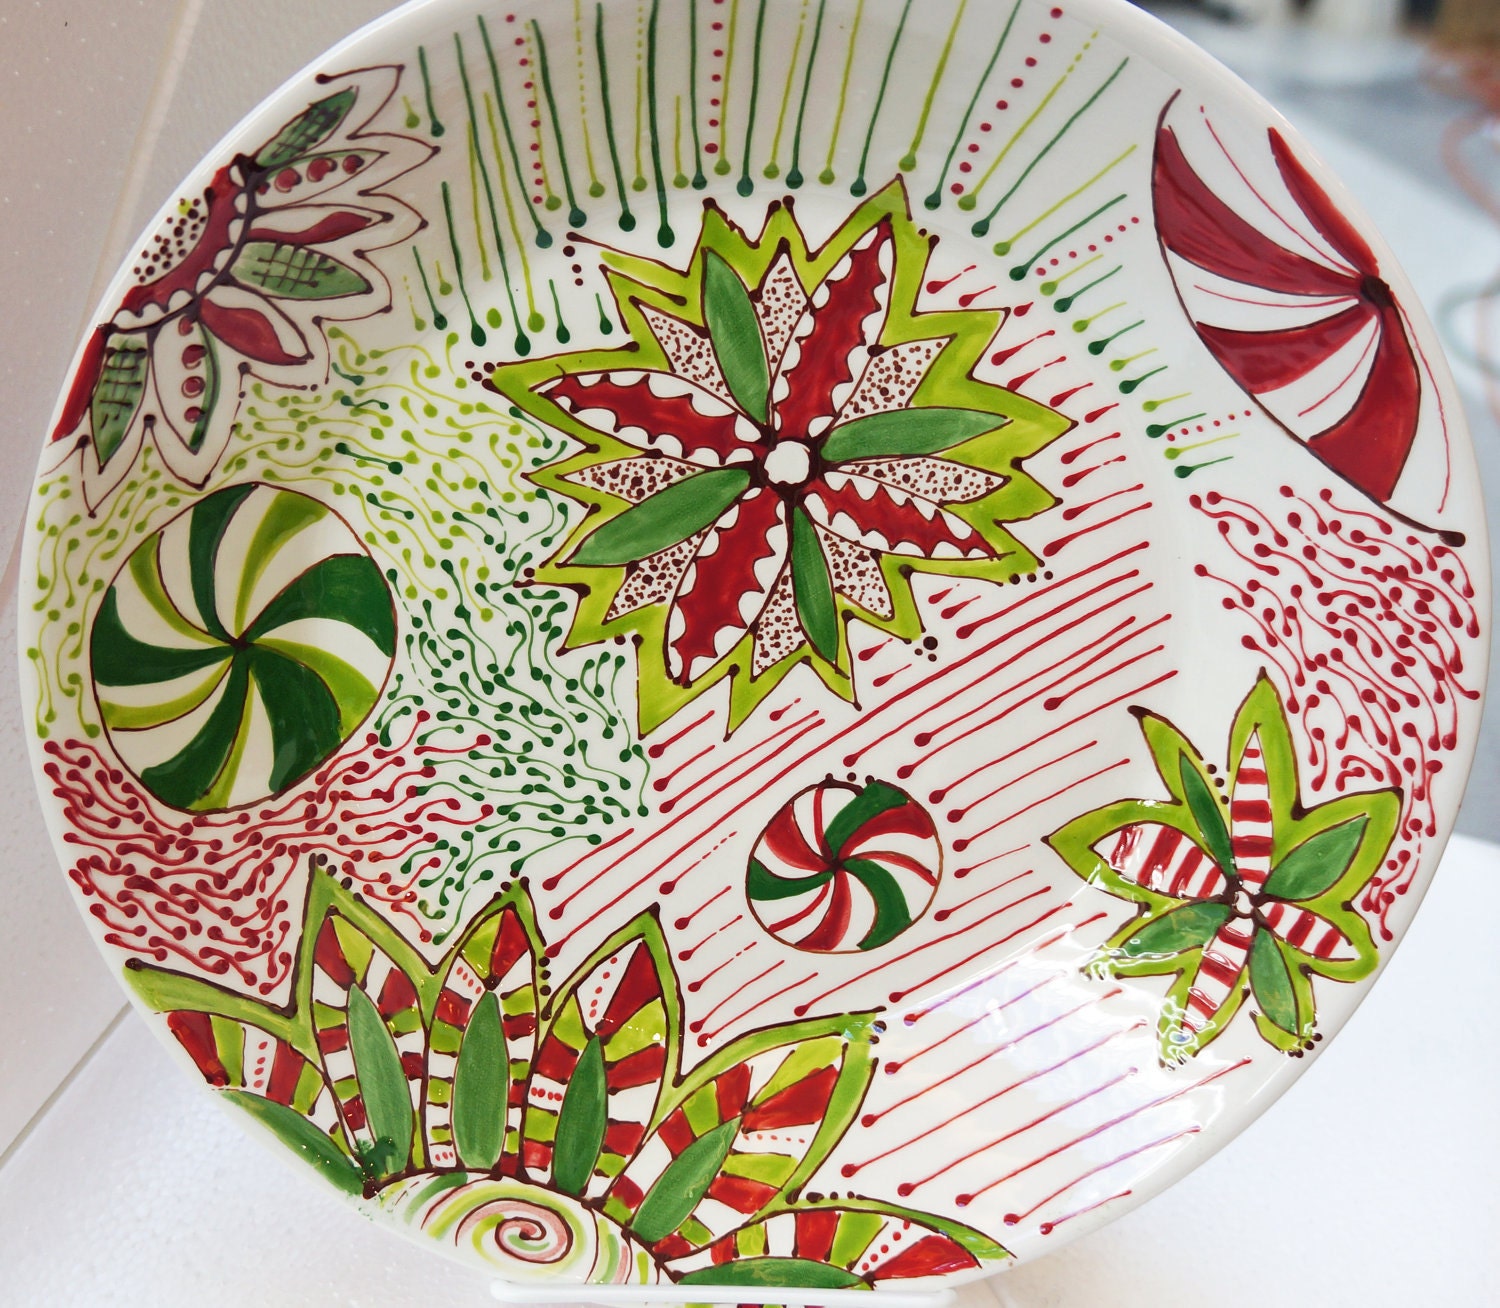 Christmas Cookie Plate (Serving dish/plate/bowl) Red and Greens, whimsical Christmas Dish